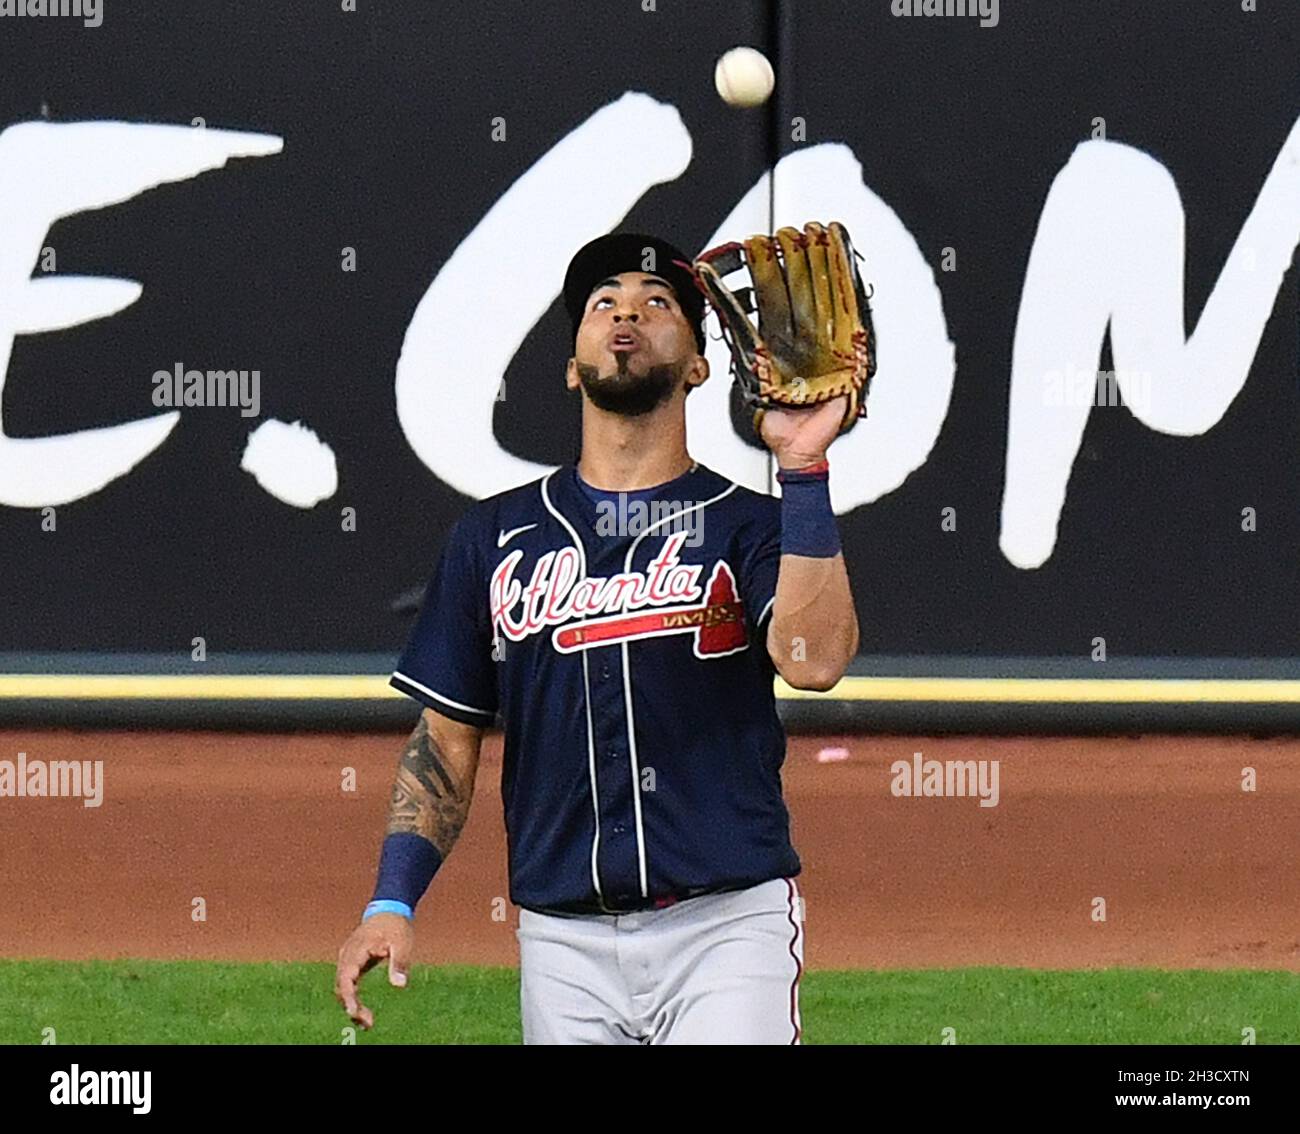 Houston, USA. 27th Oct, 2021. Atlanta Braves left fielder Eddie Rosario  catches a long fly ball from Houston Astros Yuli Gurriel in the 4th inning  in game two in the MLB World